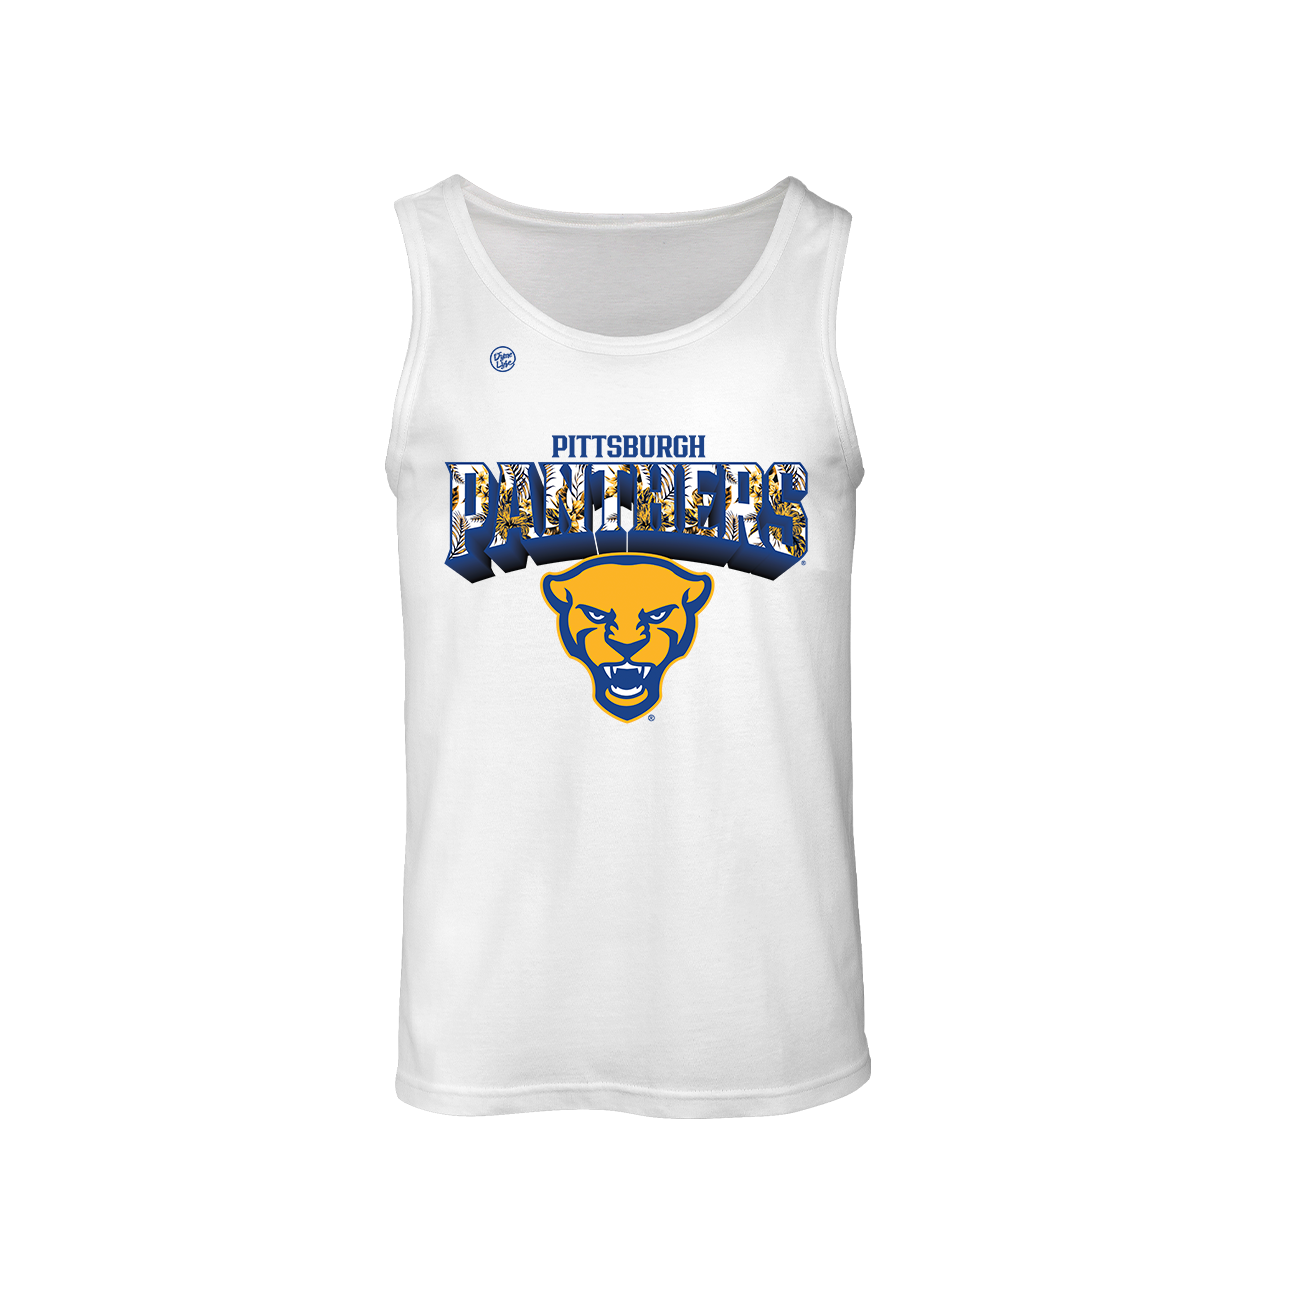 Pittsburgh Panthers Men’s Floral Team Tank